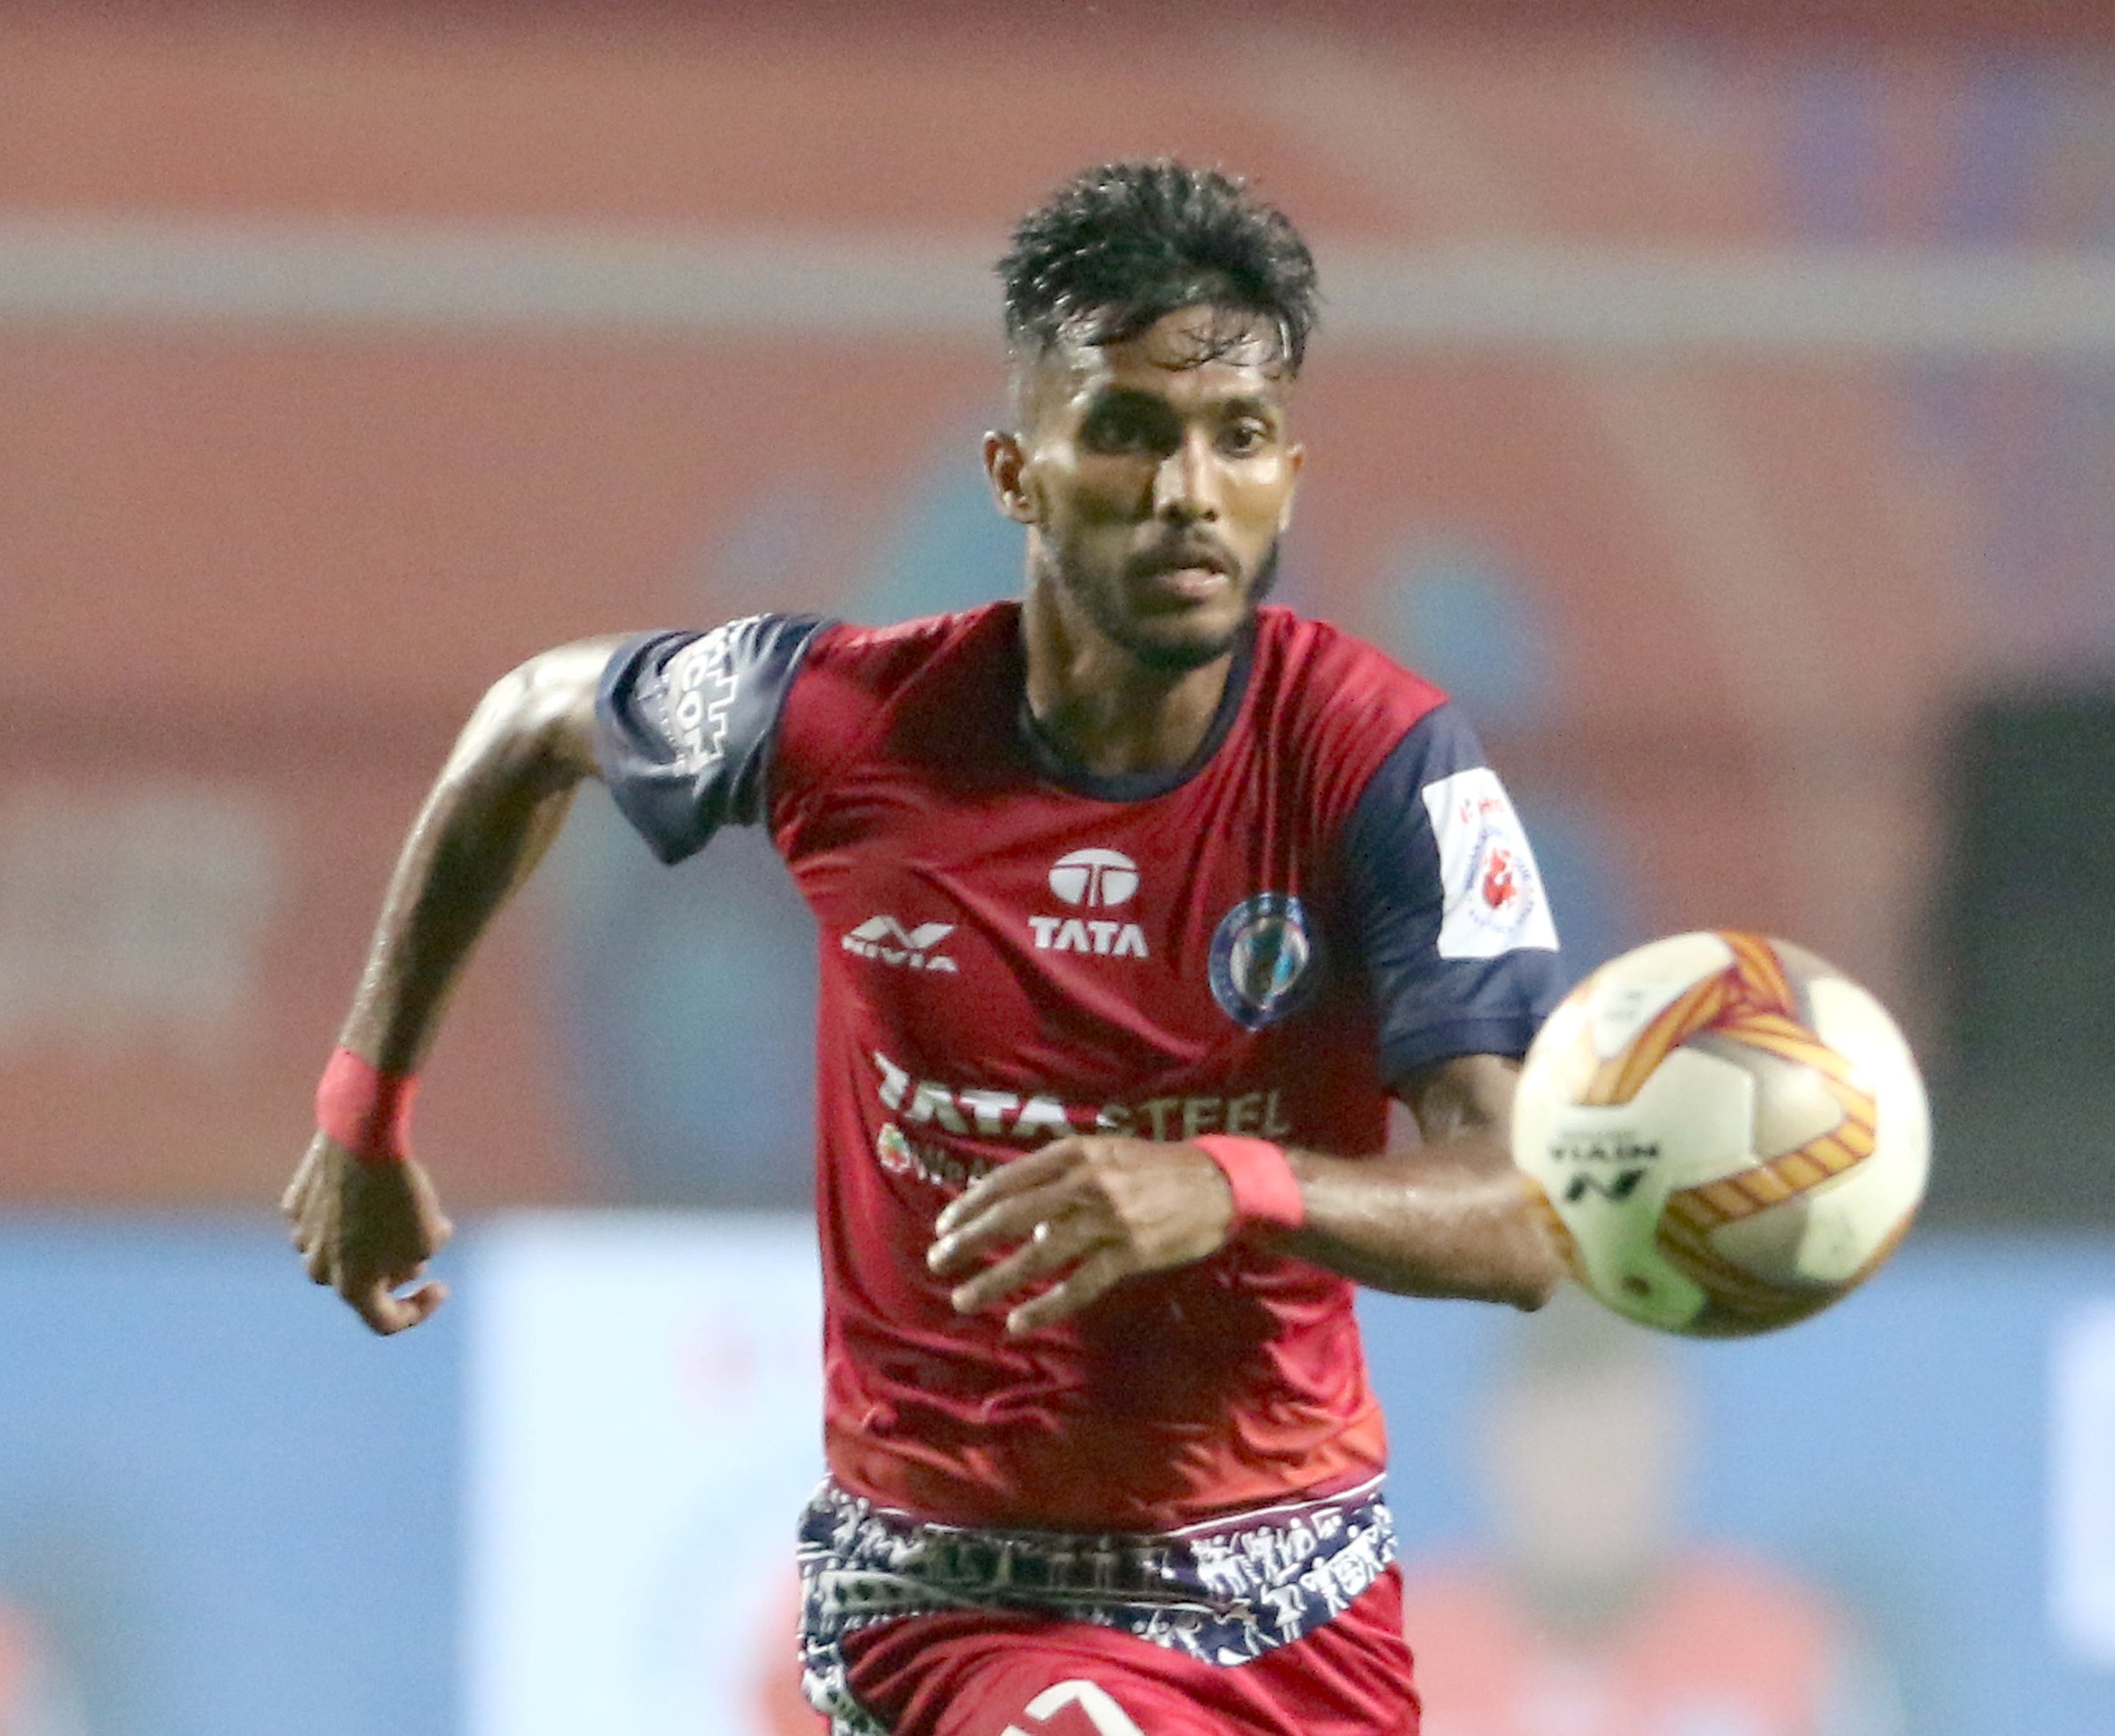 Farukh Choudhary of Jamshedpur FC and Carlos Javier Delgado of Odisha FC in action during match 3 of the Indian Super League ( ISL ) between Jamshedpur FC and Odisha FC held at the JRD Tata Sports Complex, Jamshedpur, India on the 22nd October 2019. Photo by: Vipin Pawar / SPORTZPICS for ISL